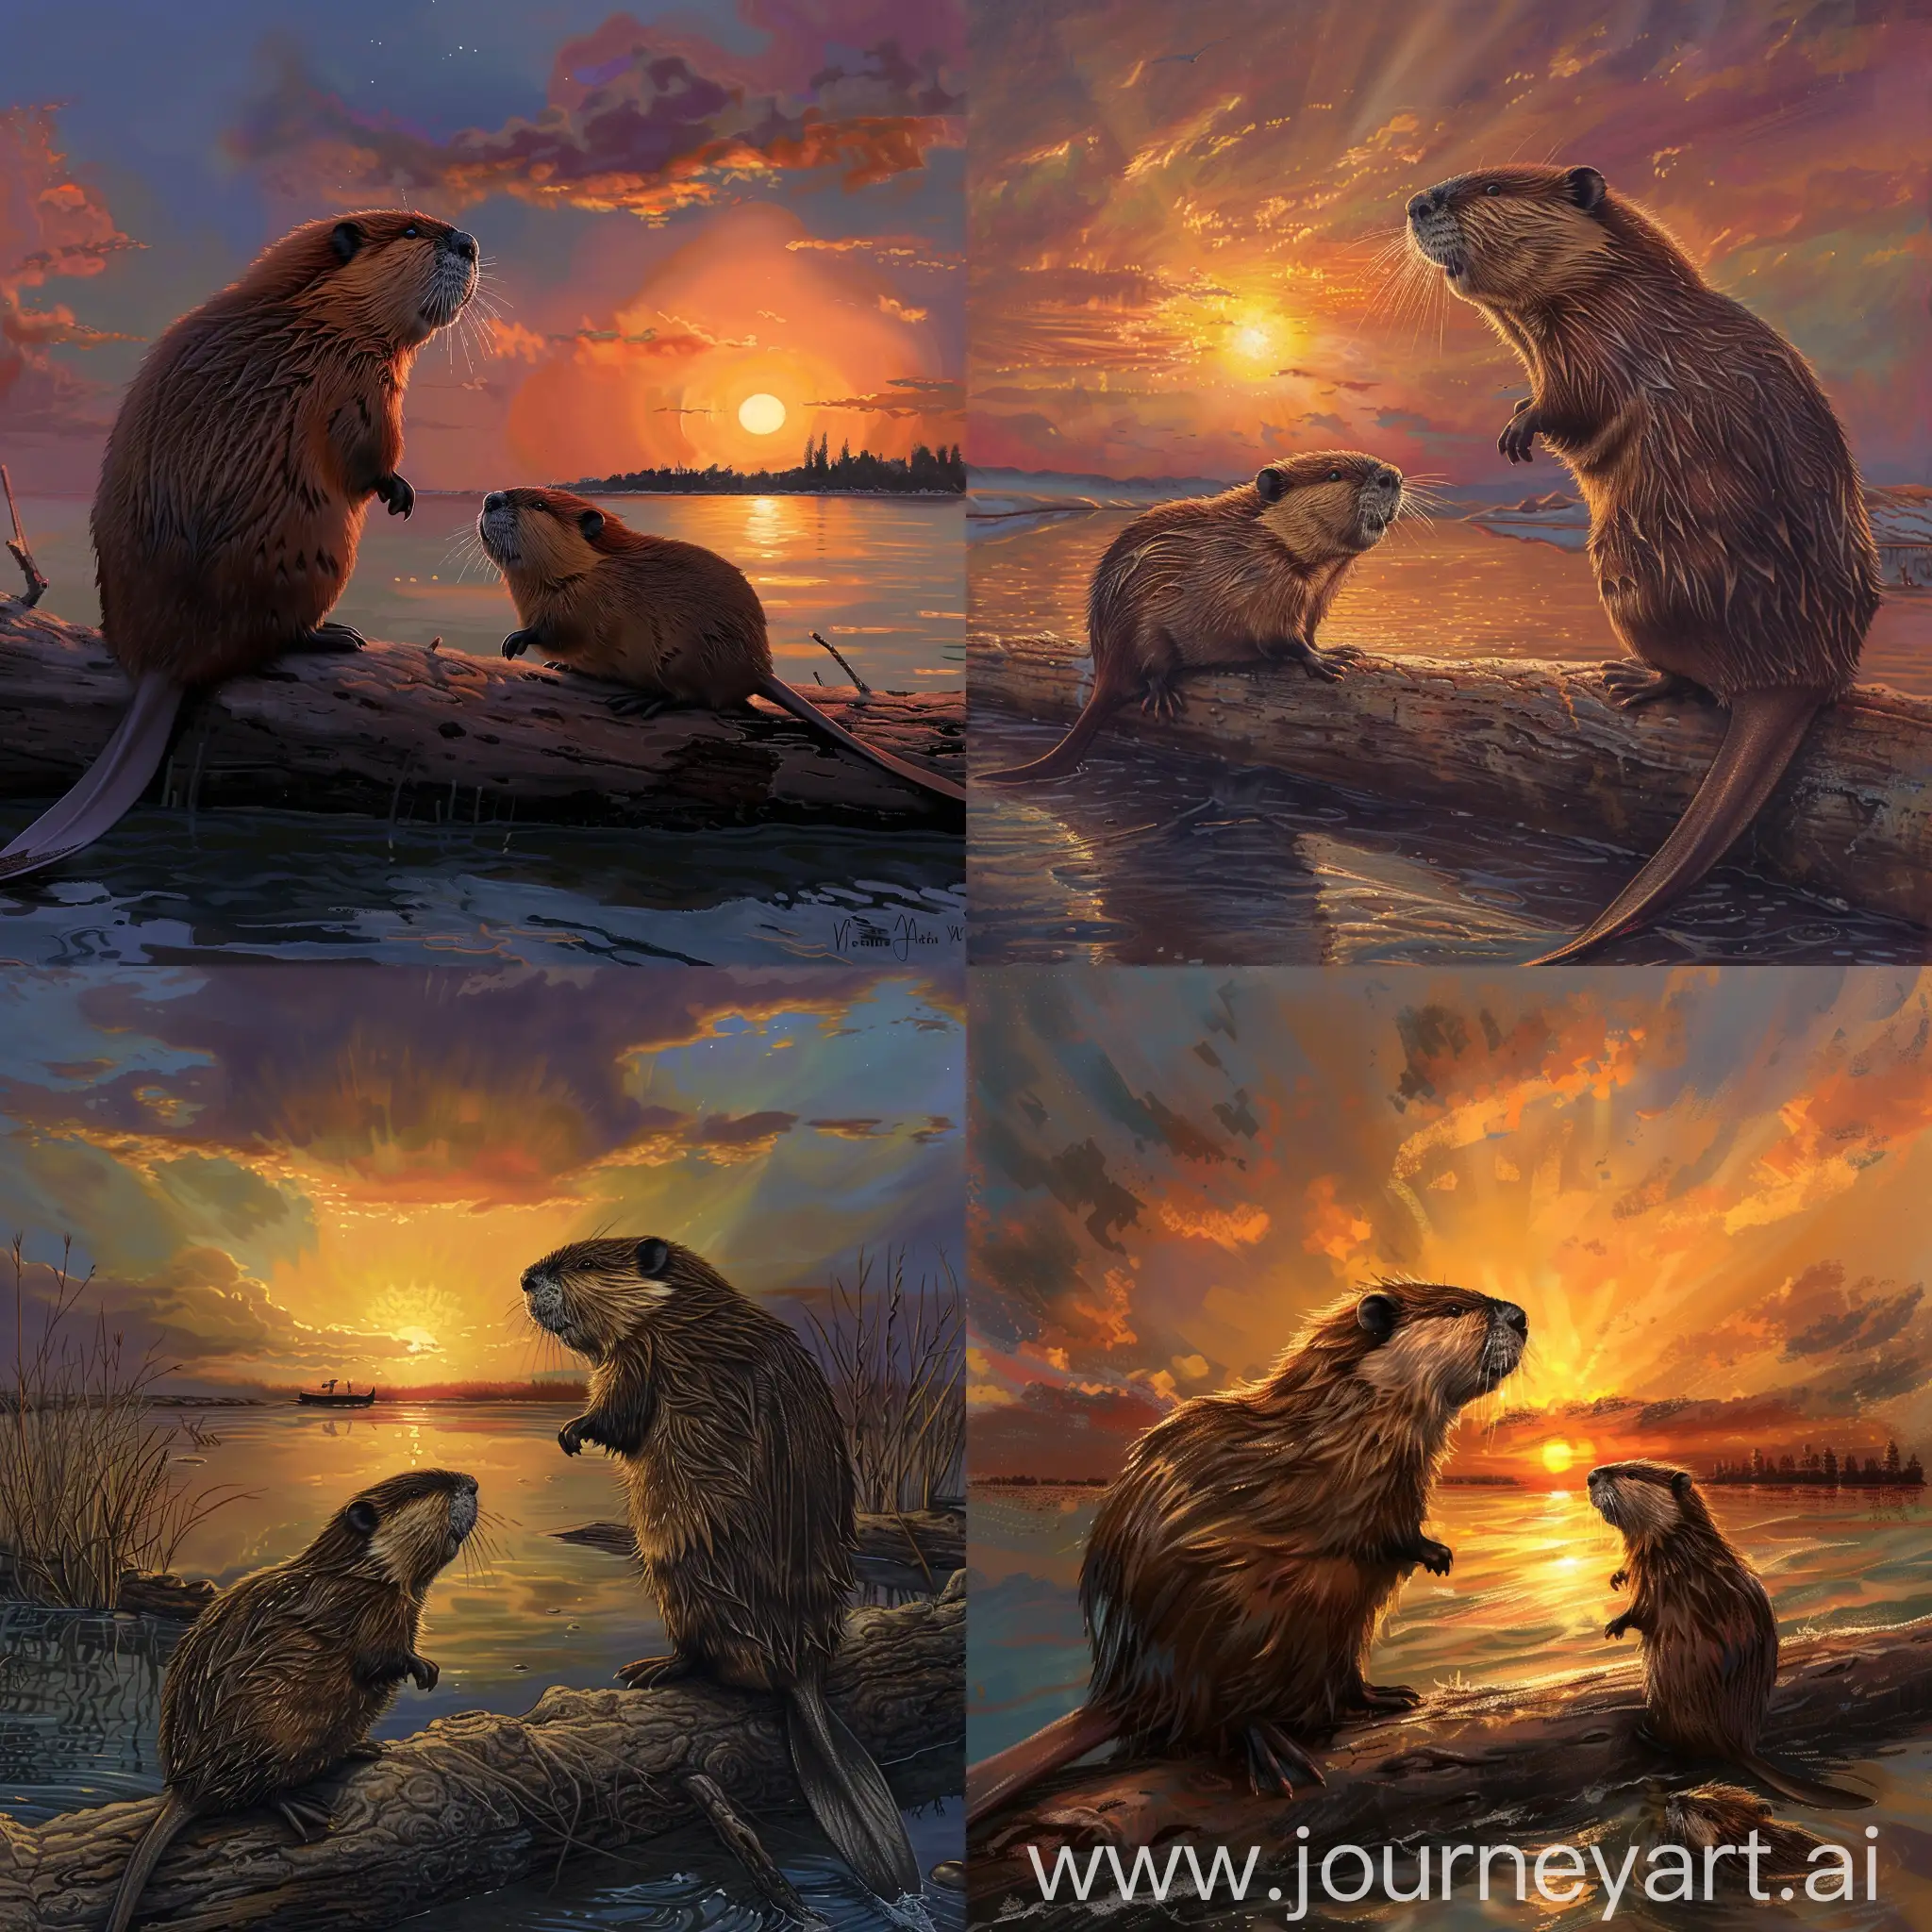 the beaver stands with his back to the viewer, on a log in the water, looking at the sunset, and next to him stands a second beaver, half sideways to the viewer, who is looking at the first beaver